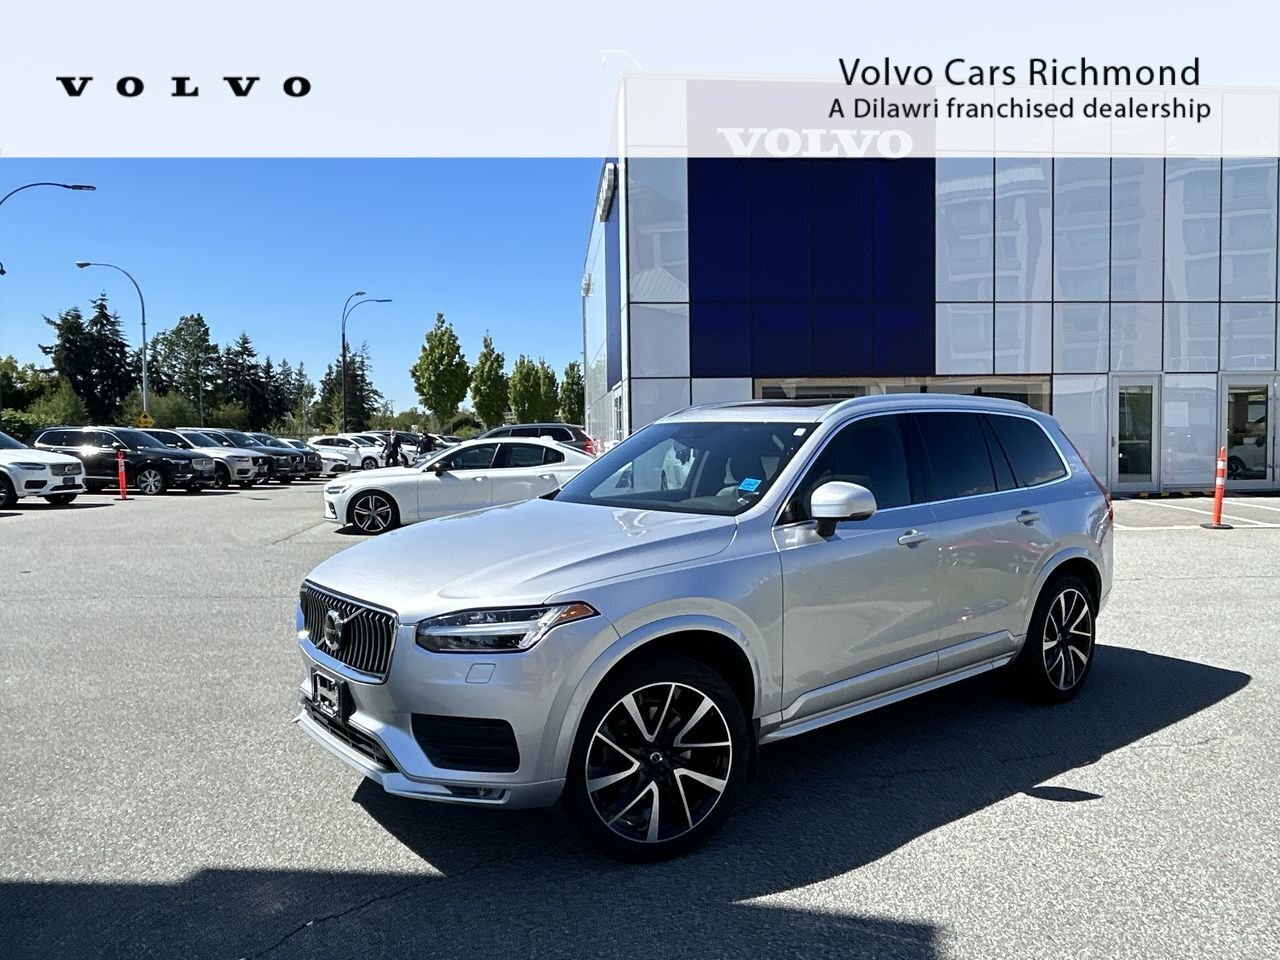 2020 Volvo XC90 T6 AWD Momentum (6-Seat) | Finance from 3.99% OAC 